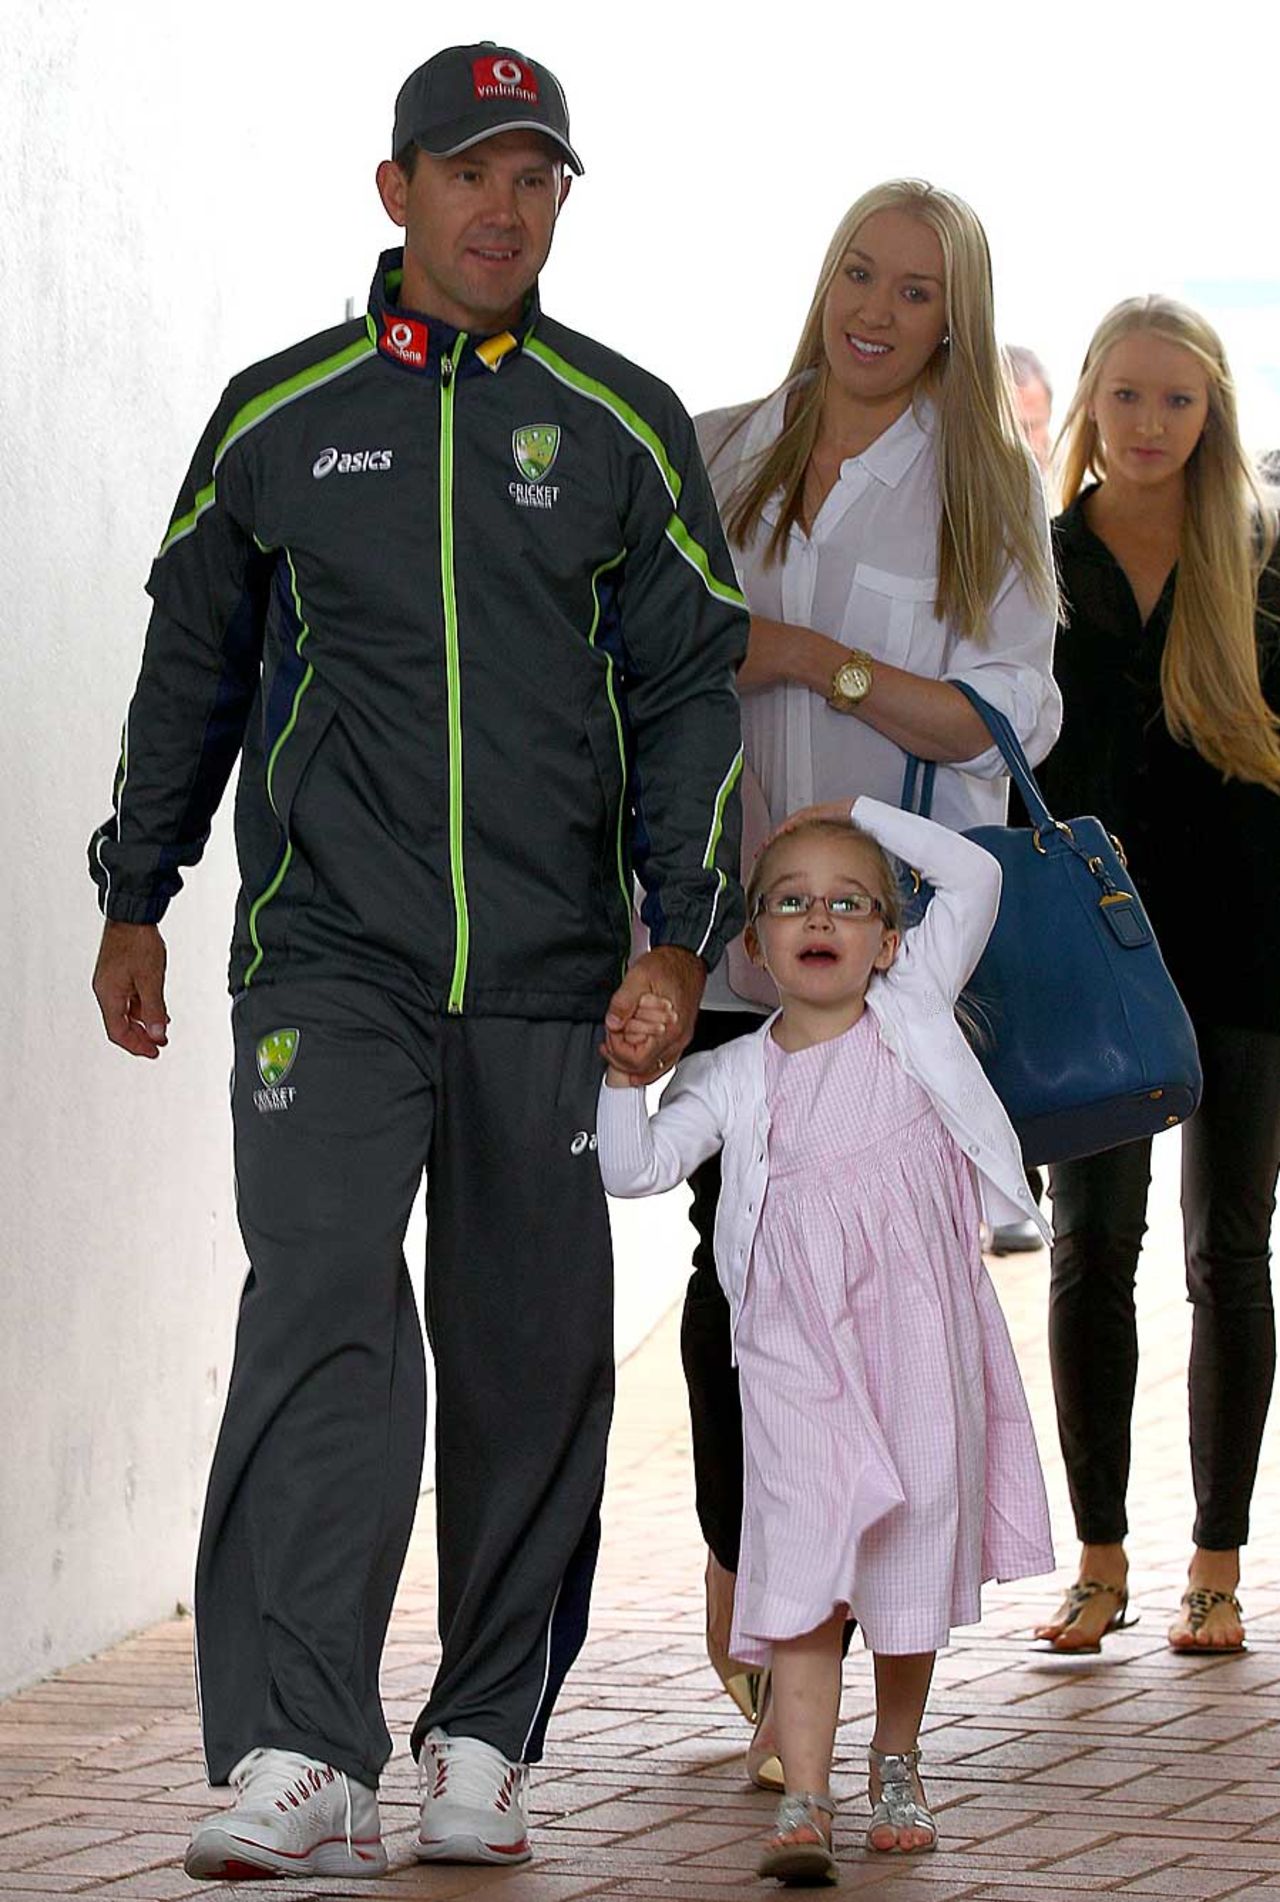 Ricky Ponting arrives for the press conference with his wife and daughter, Perth, November 29, 2012